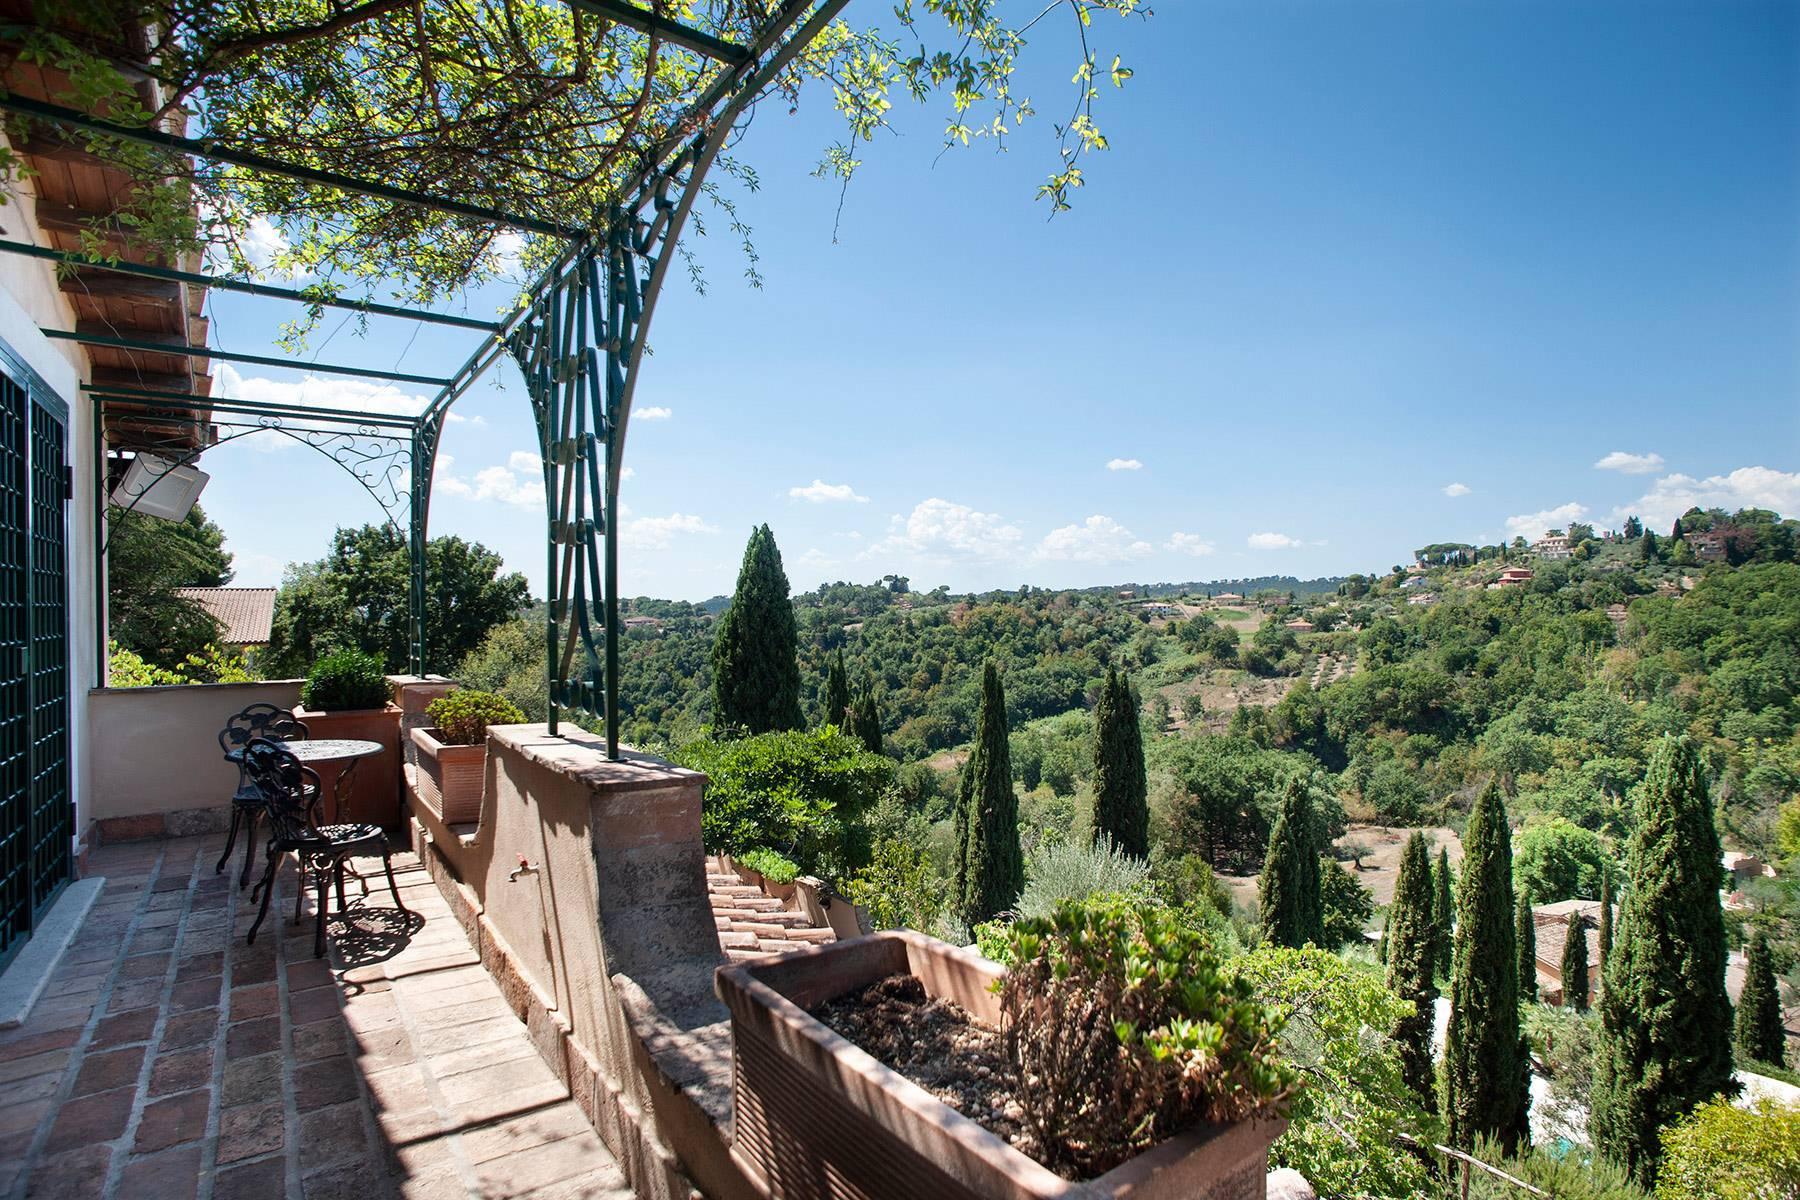 Villa Nayara - Lovely mansion with swimming pool 30 minutes from Rome - 47